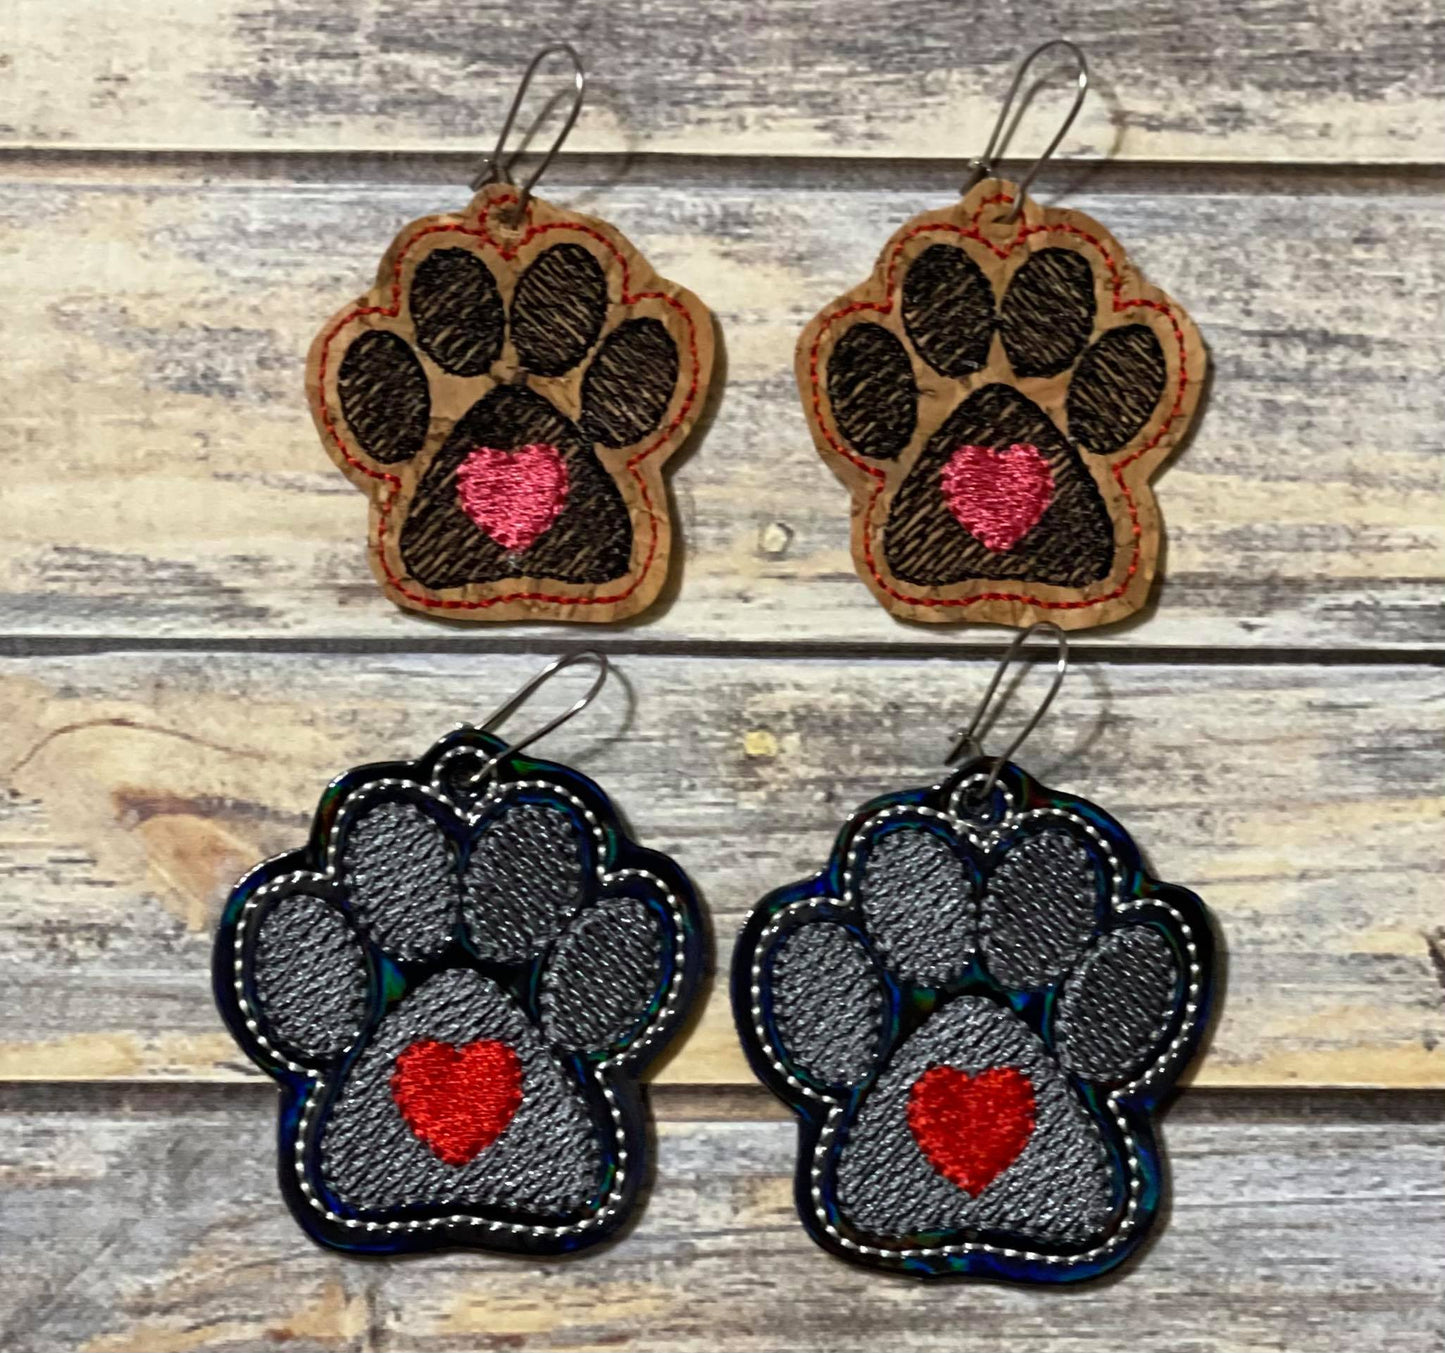 Paw Heart Earrings - 2 sizes - 4x4 and 5x7 Grouped- Digital Embroidery Design